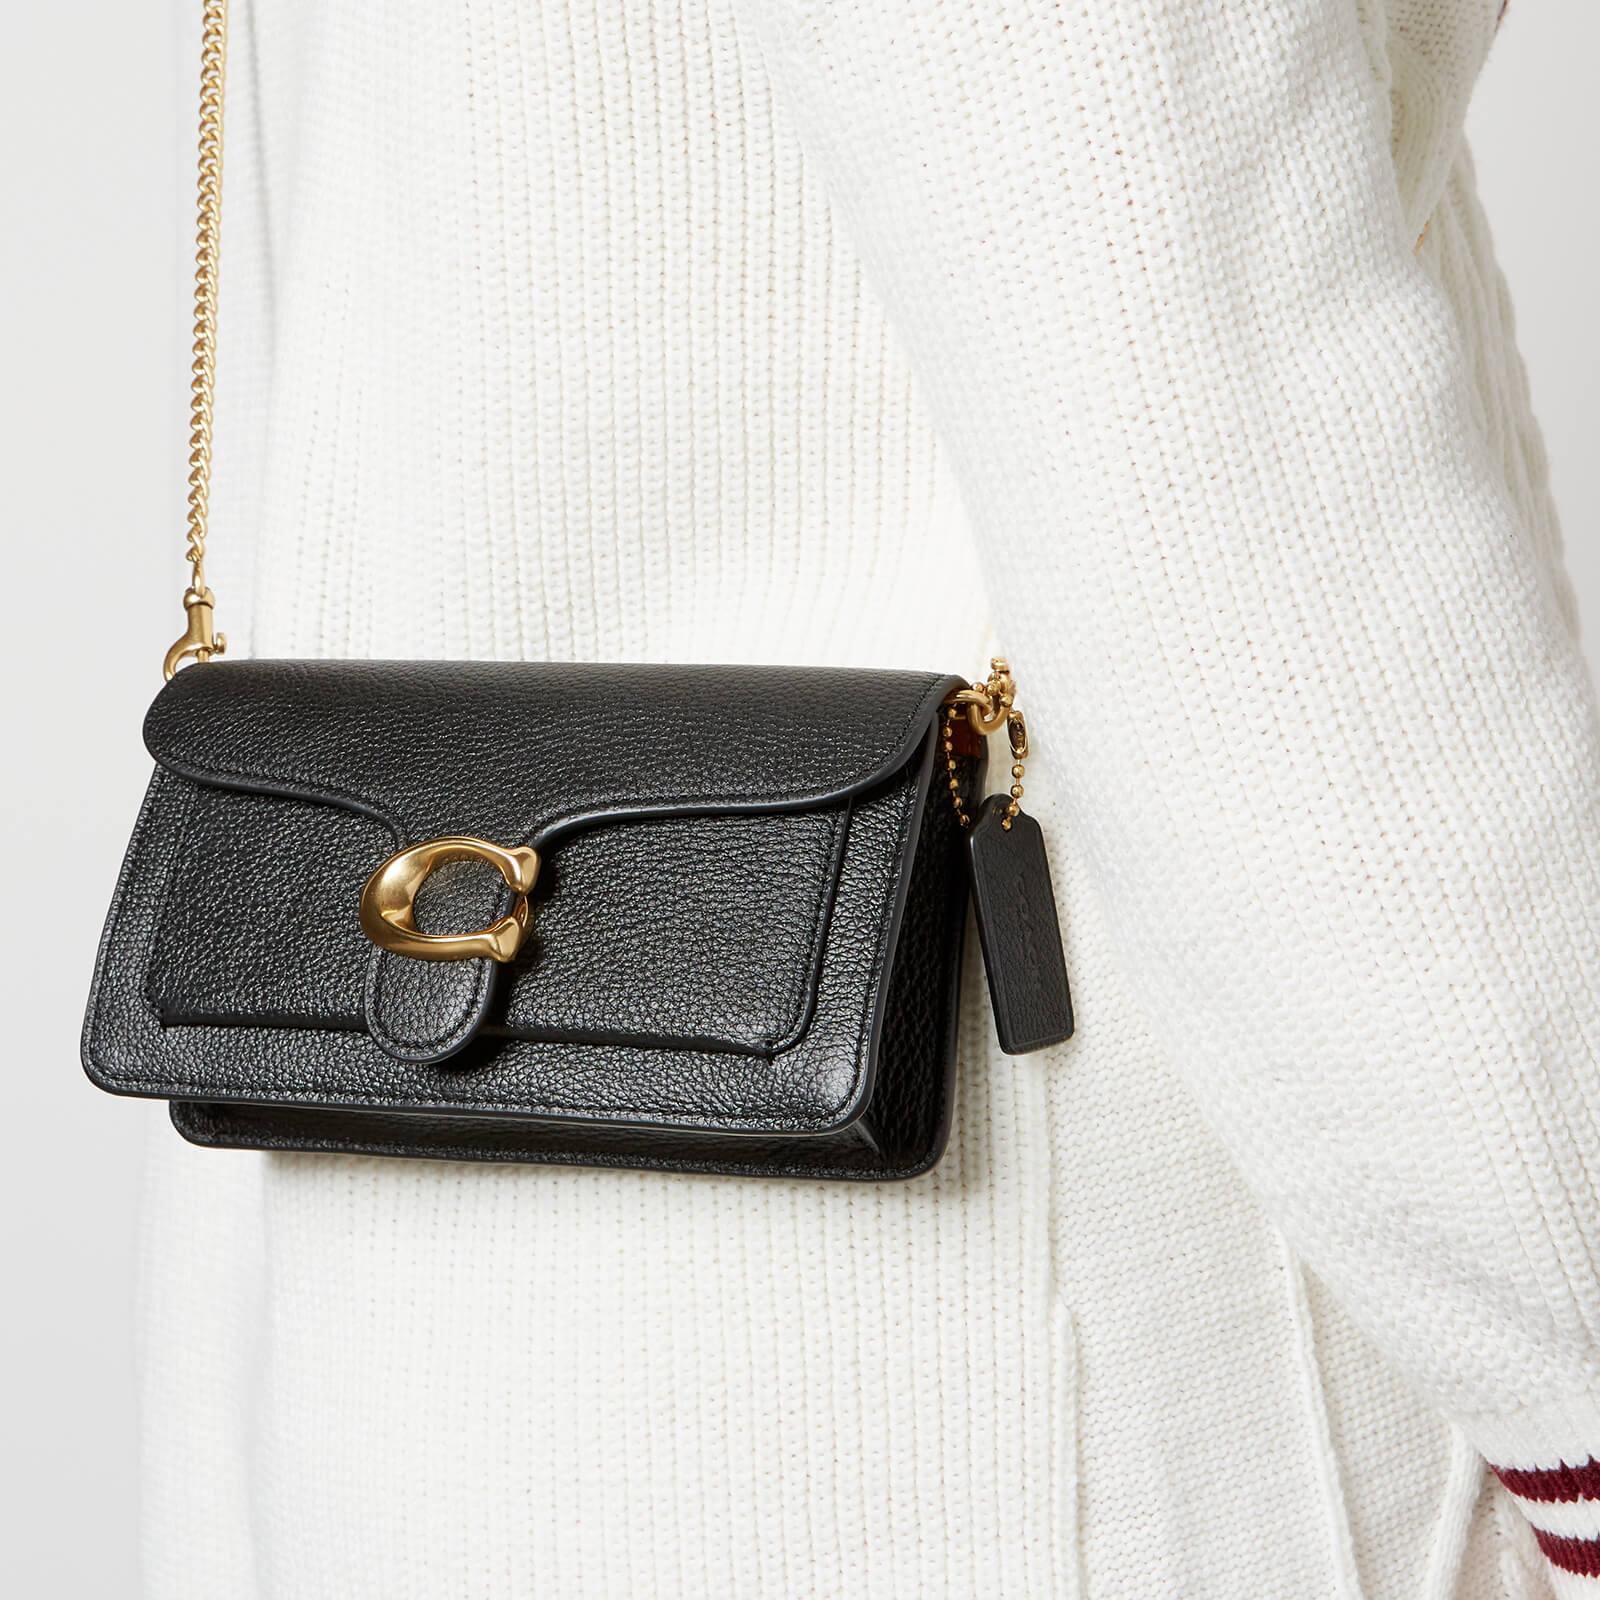 COACH Tabby Chain Leather Clutch Bag in Black | Lyst UK